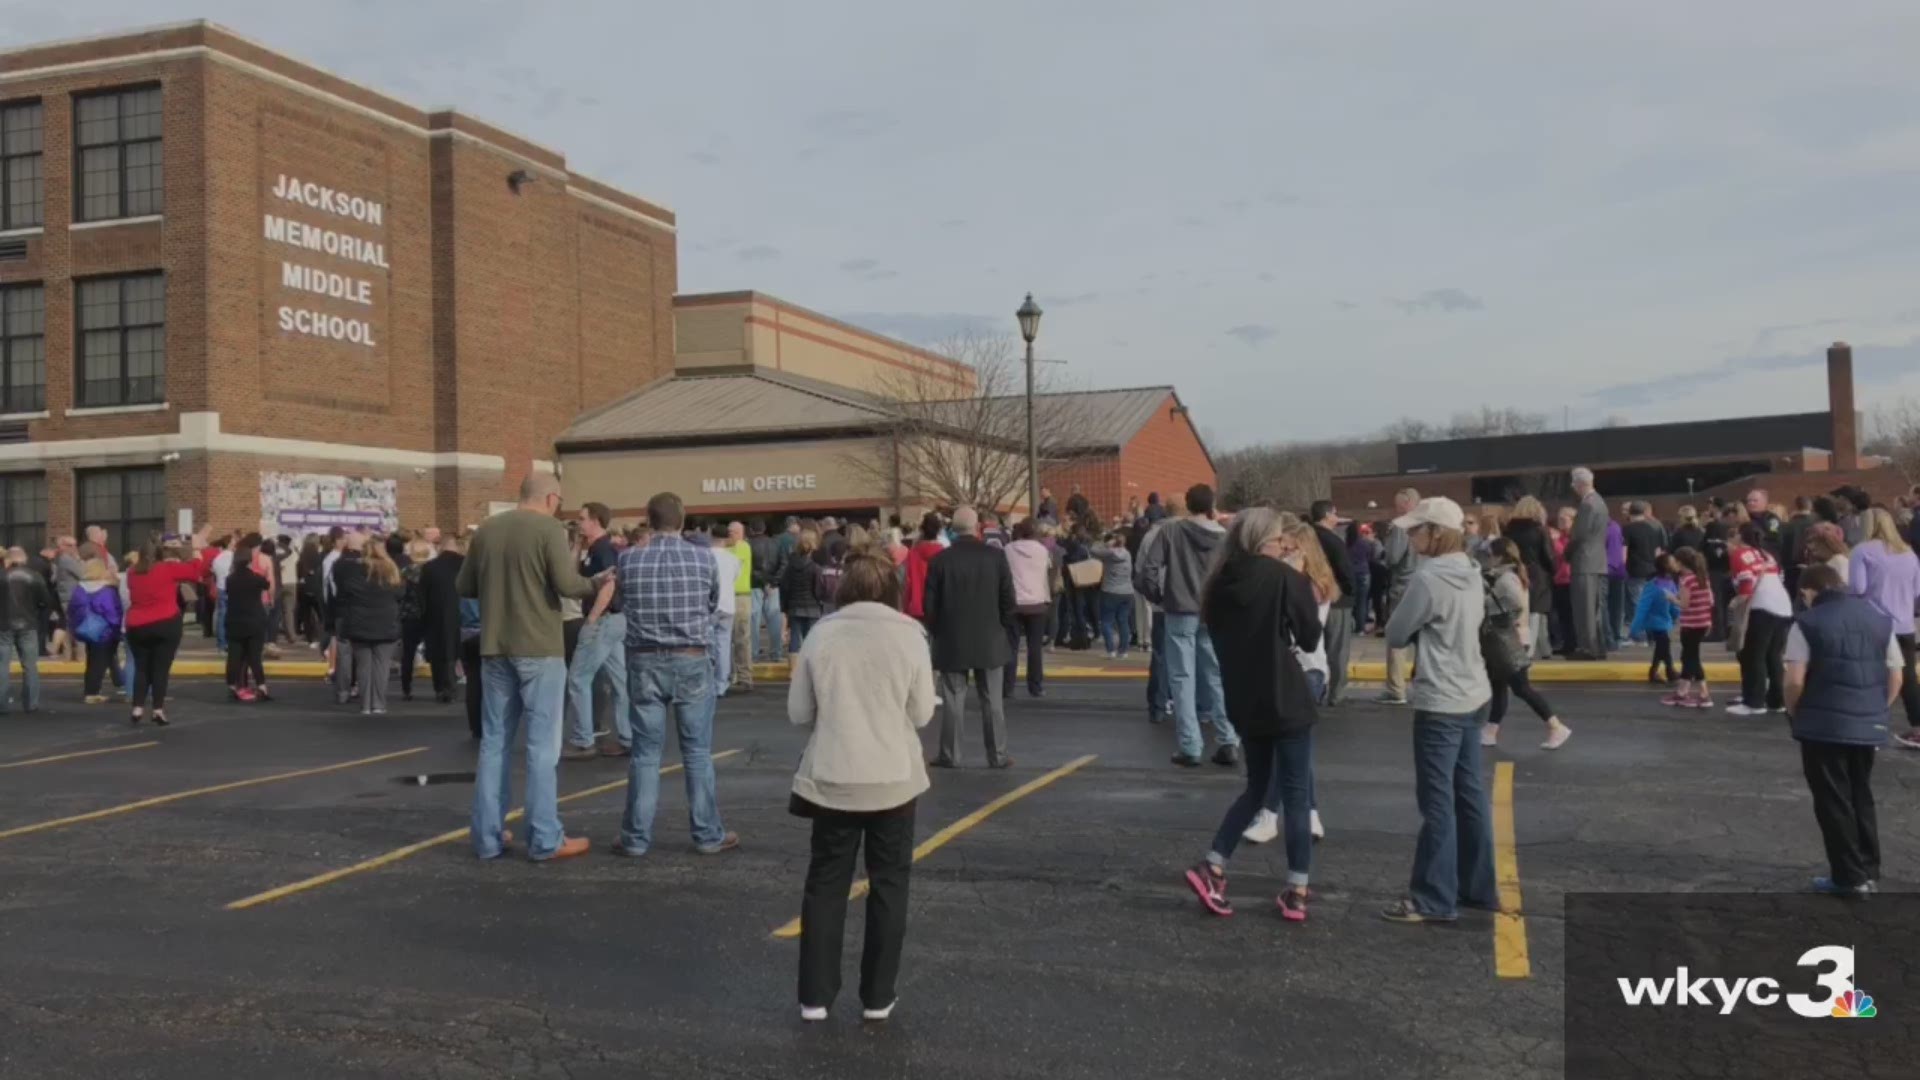 Feb. 20, 2018: This was the scene outside Jackson Memorial Middle School as parents waited to retrieve their children after a student shot himself in the school bathroom.